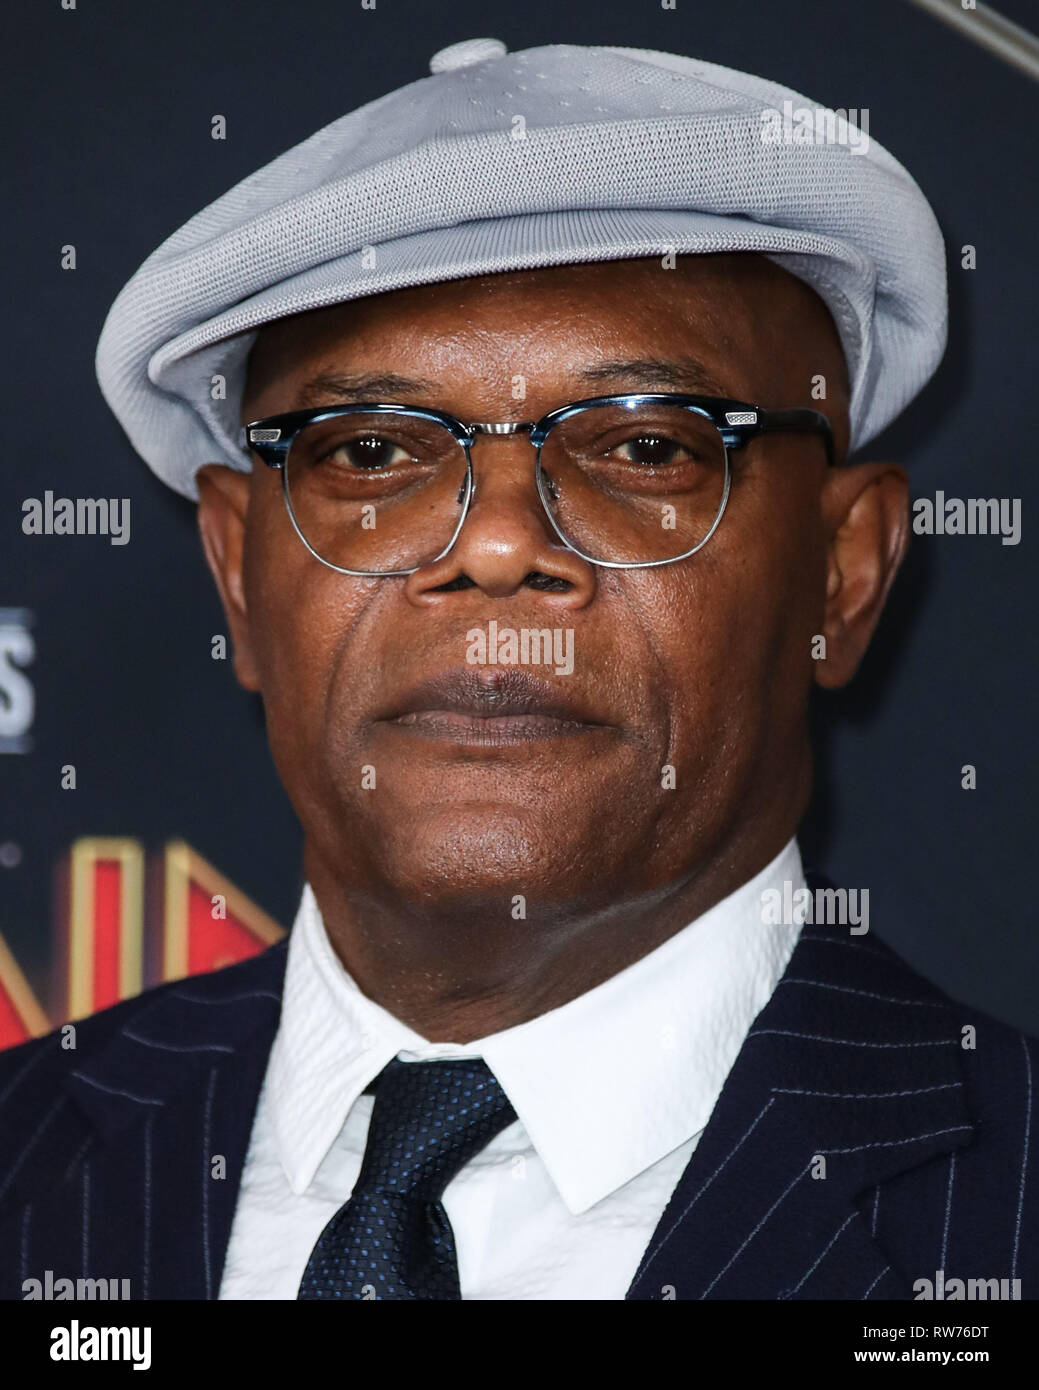 HOLLYWOOD, LOS ANGELES, CA, USA - MARCH 04: Actor Samuel L. Jackson arrives at the World Premiere Of Marvel Studios 'Captain Marvel' held at the El Capitan Theatre on March 4, 2019 in Hollywood, Los Angeles, California, United States. (Photo by Xavier Collin/Image Press Agency) Stock Photo